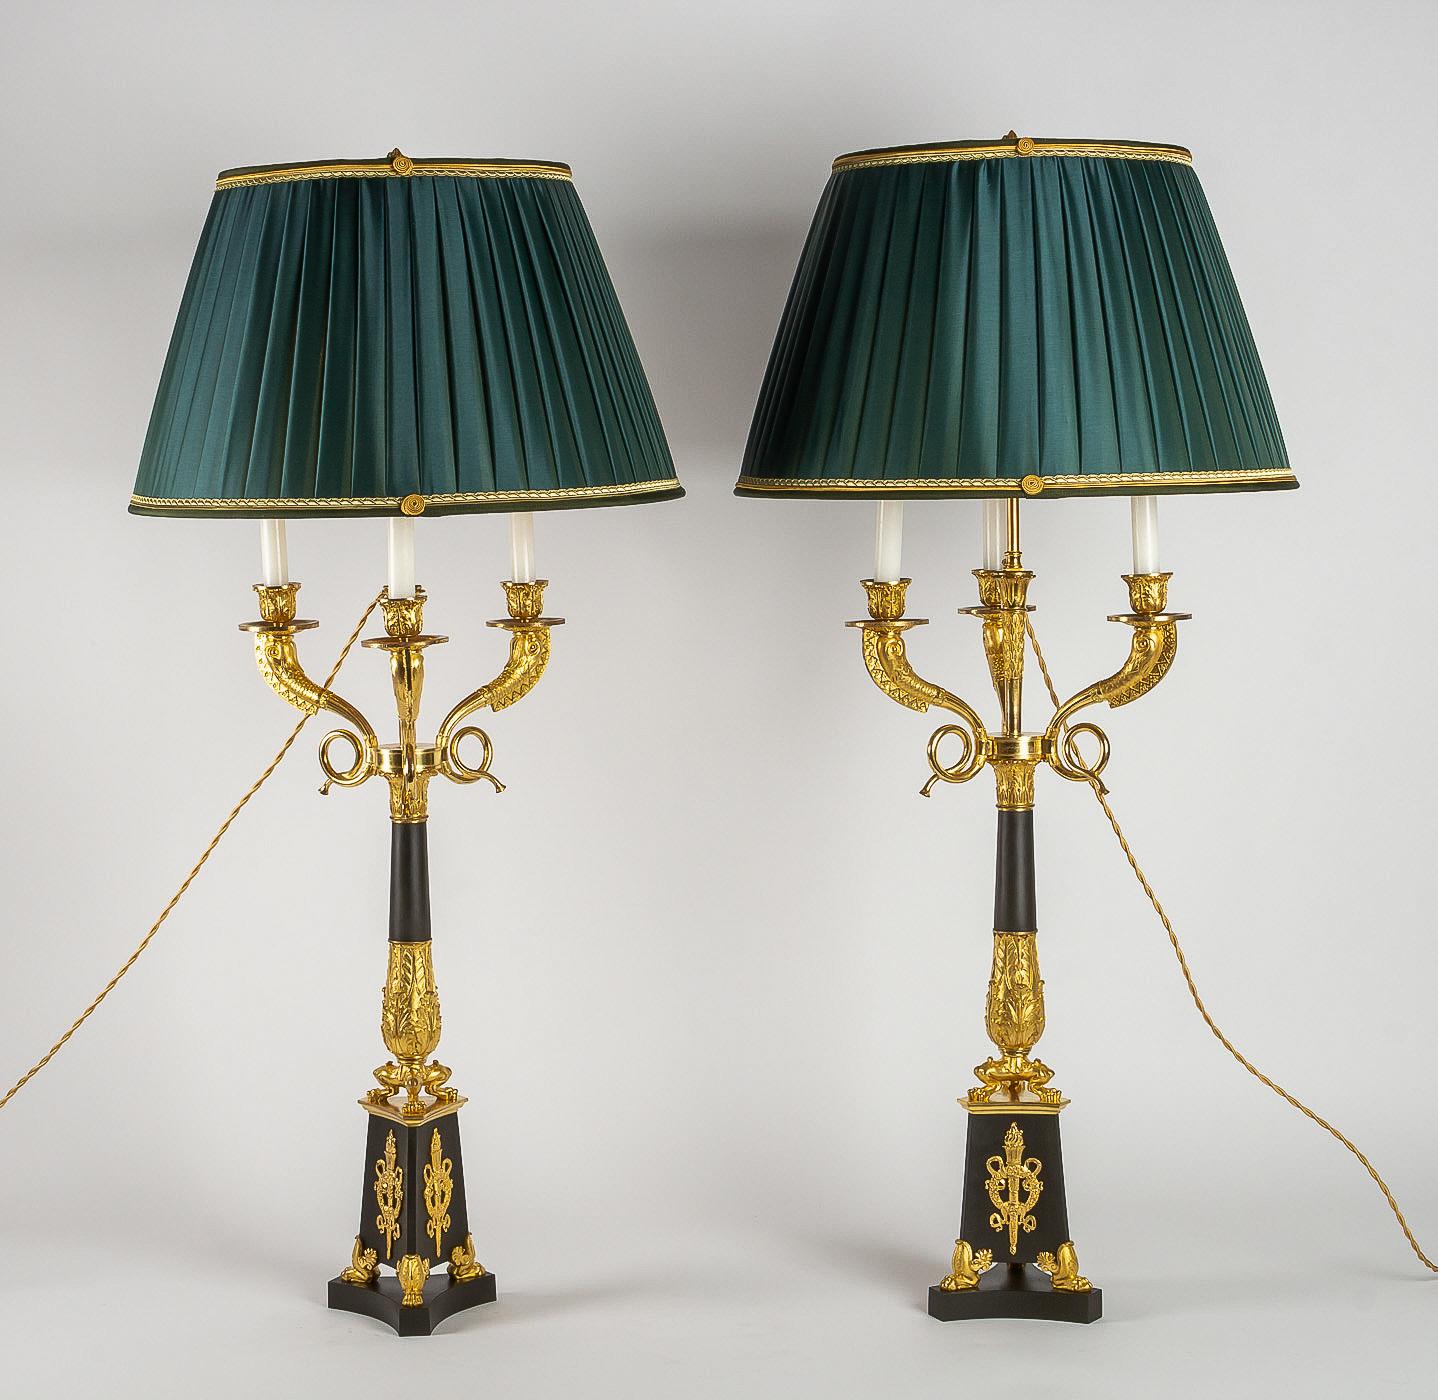 Large pair of French Restauration period candelabra converted in table lamps.

A magnificent and decorative large pair of three-light gilt bronze and patinated-bronze Restauration period candelabras, manufactured in the early 19th century, circa